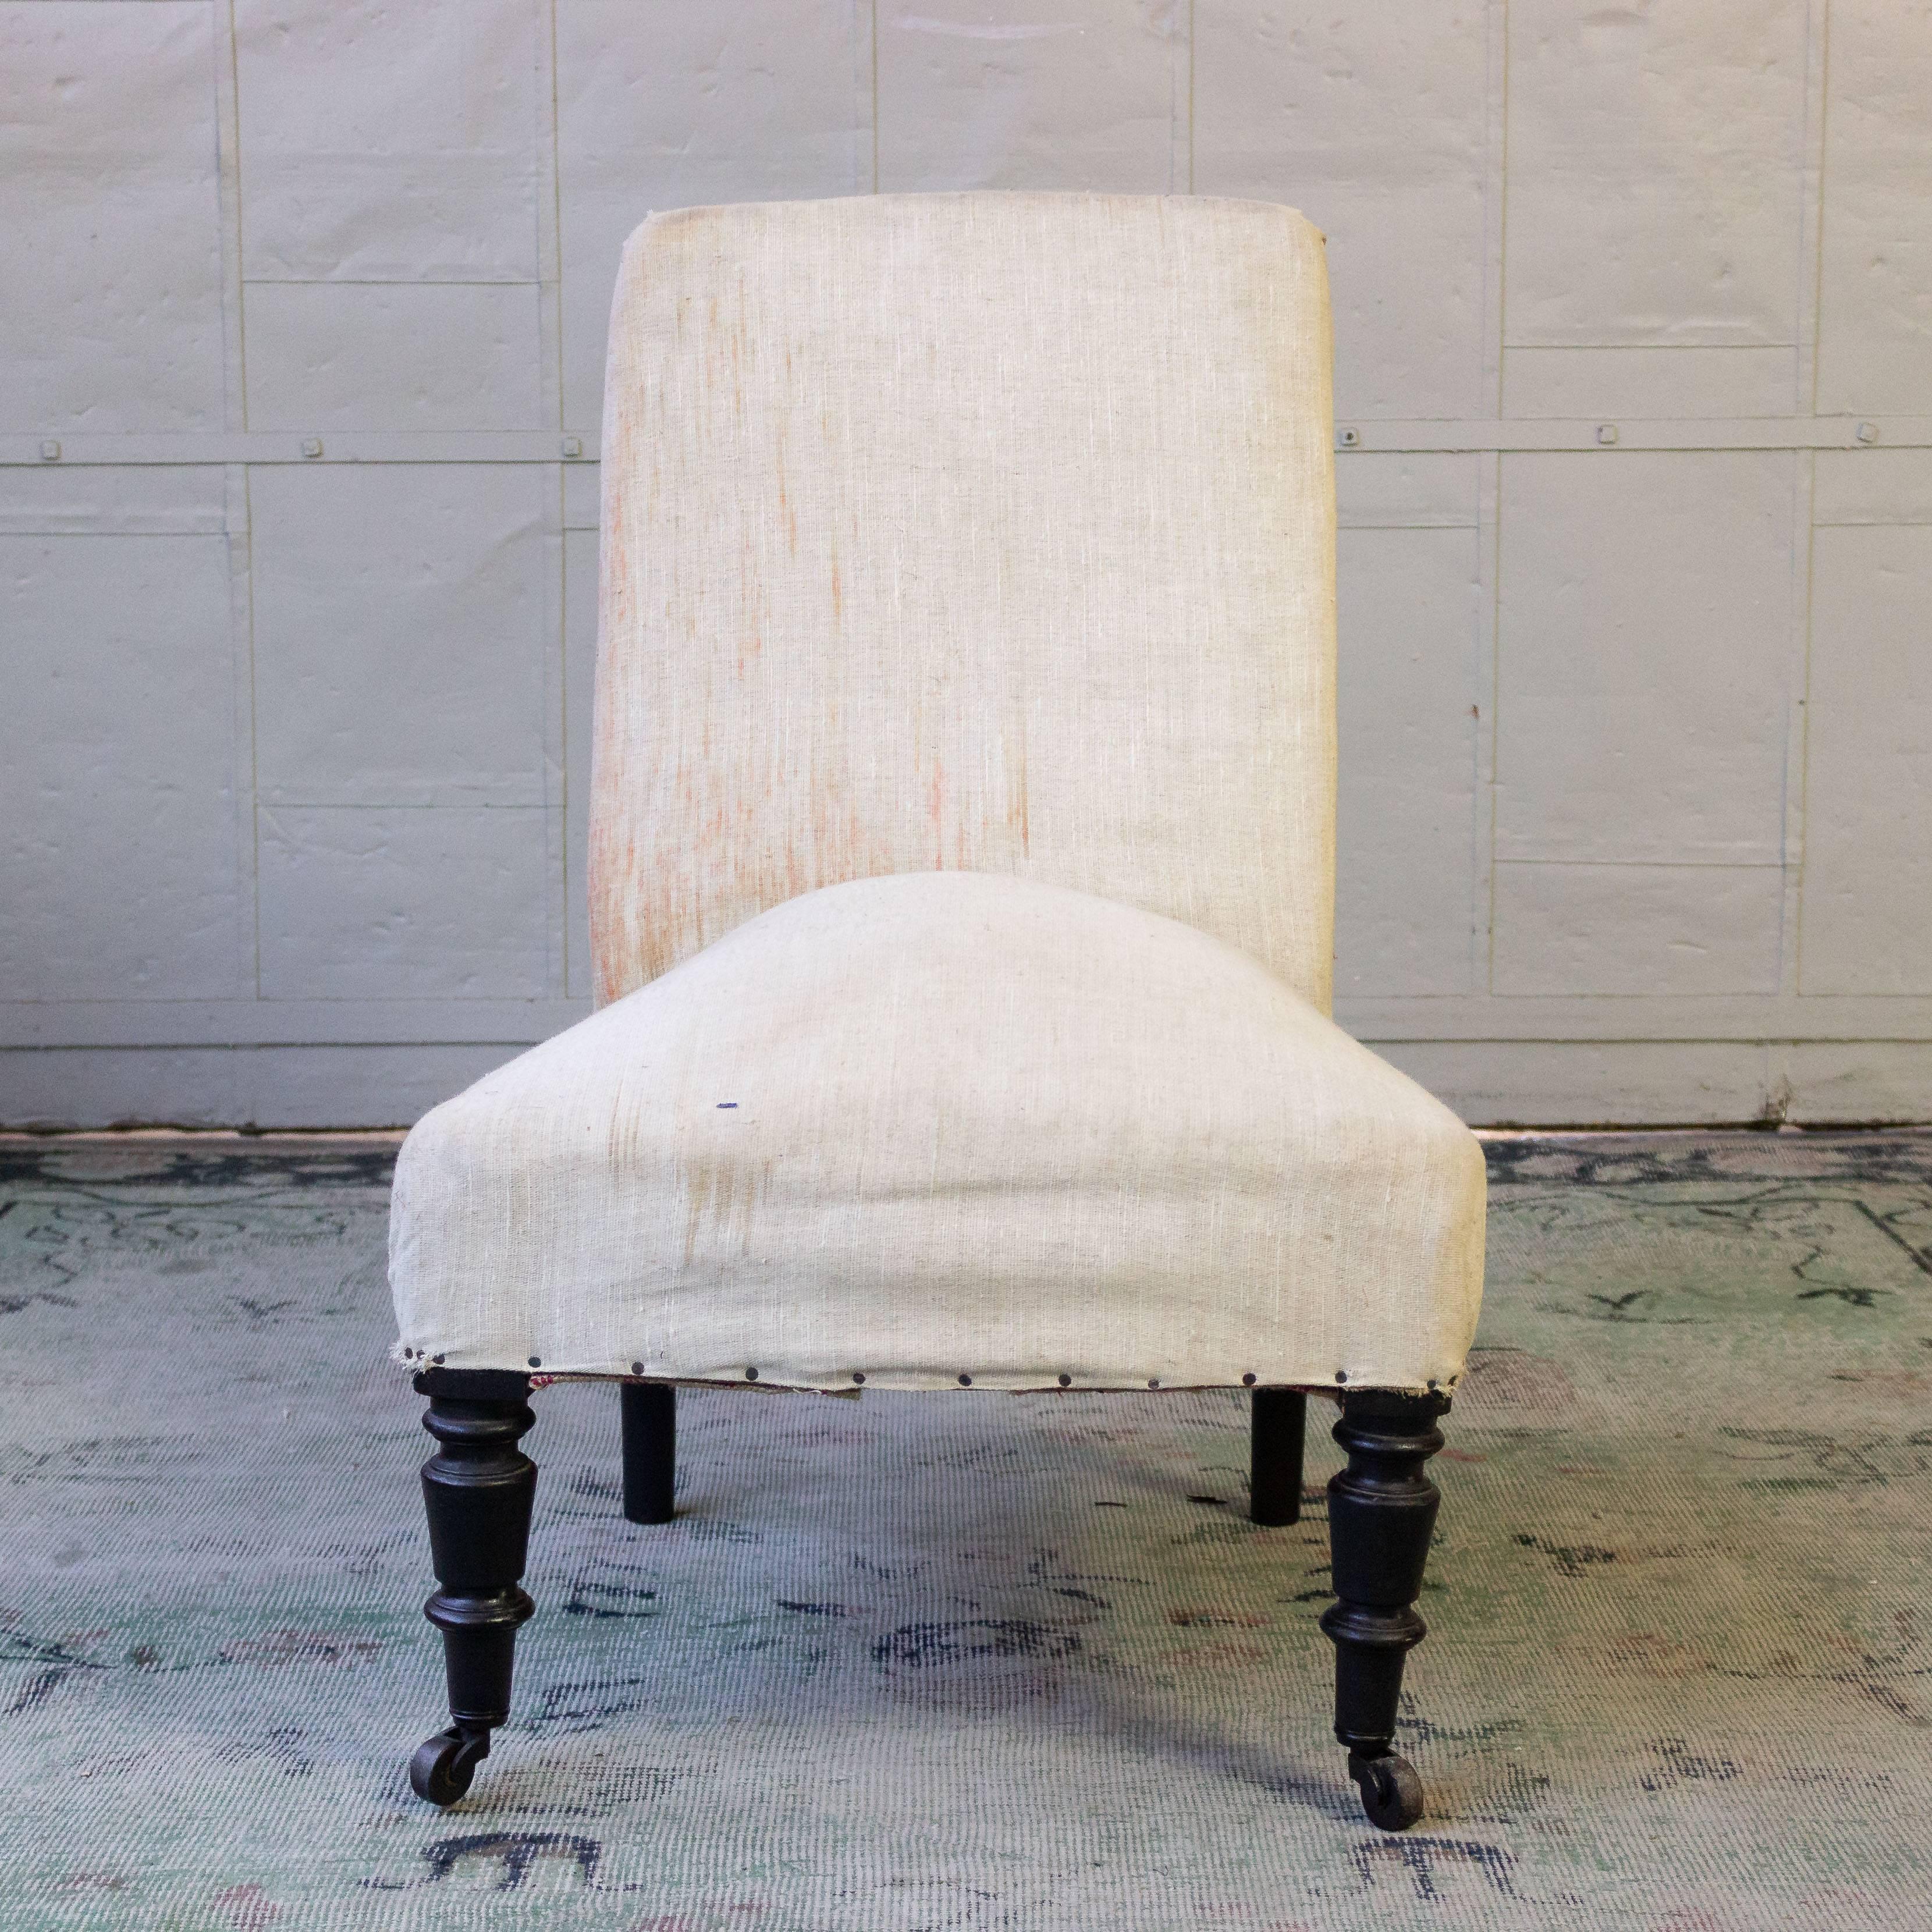 19th Century Napoleon III slipper chair. The legs have been refinished and the structure is in excellent shape. With new upholstery this chair is install ready.

Please contact for upholstery quote.